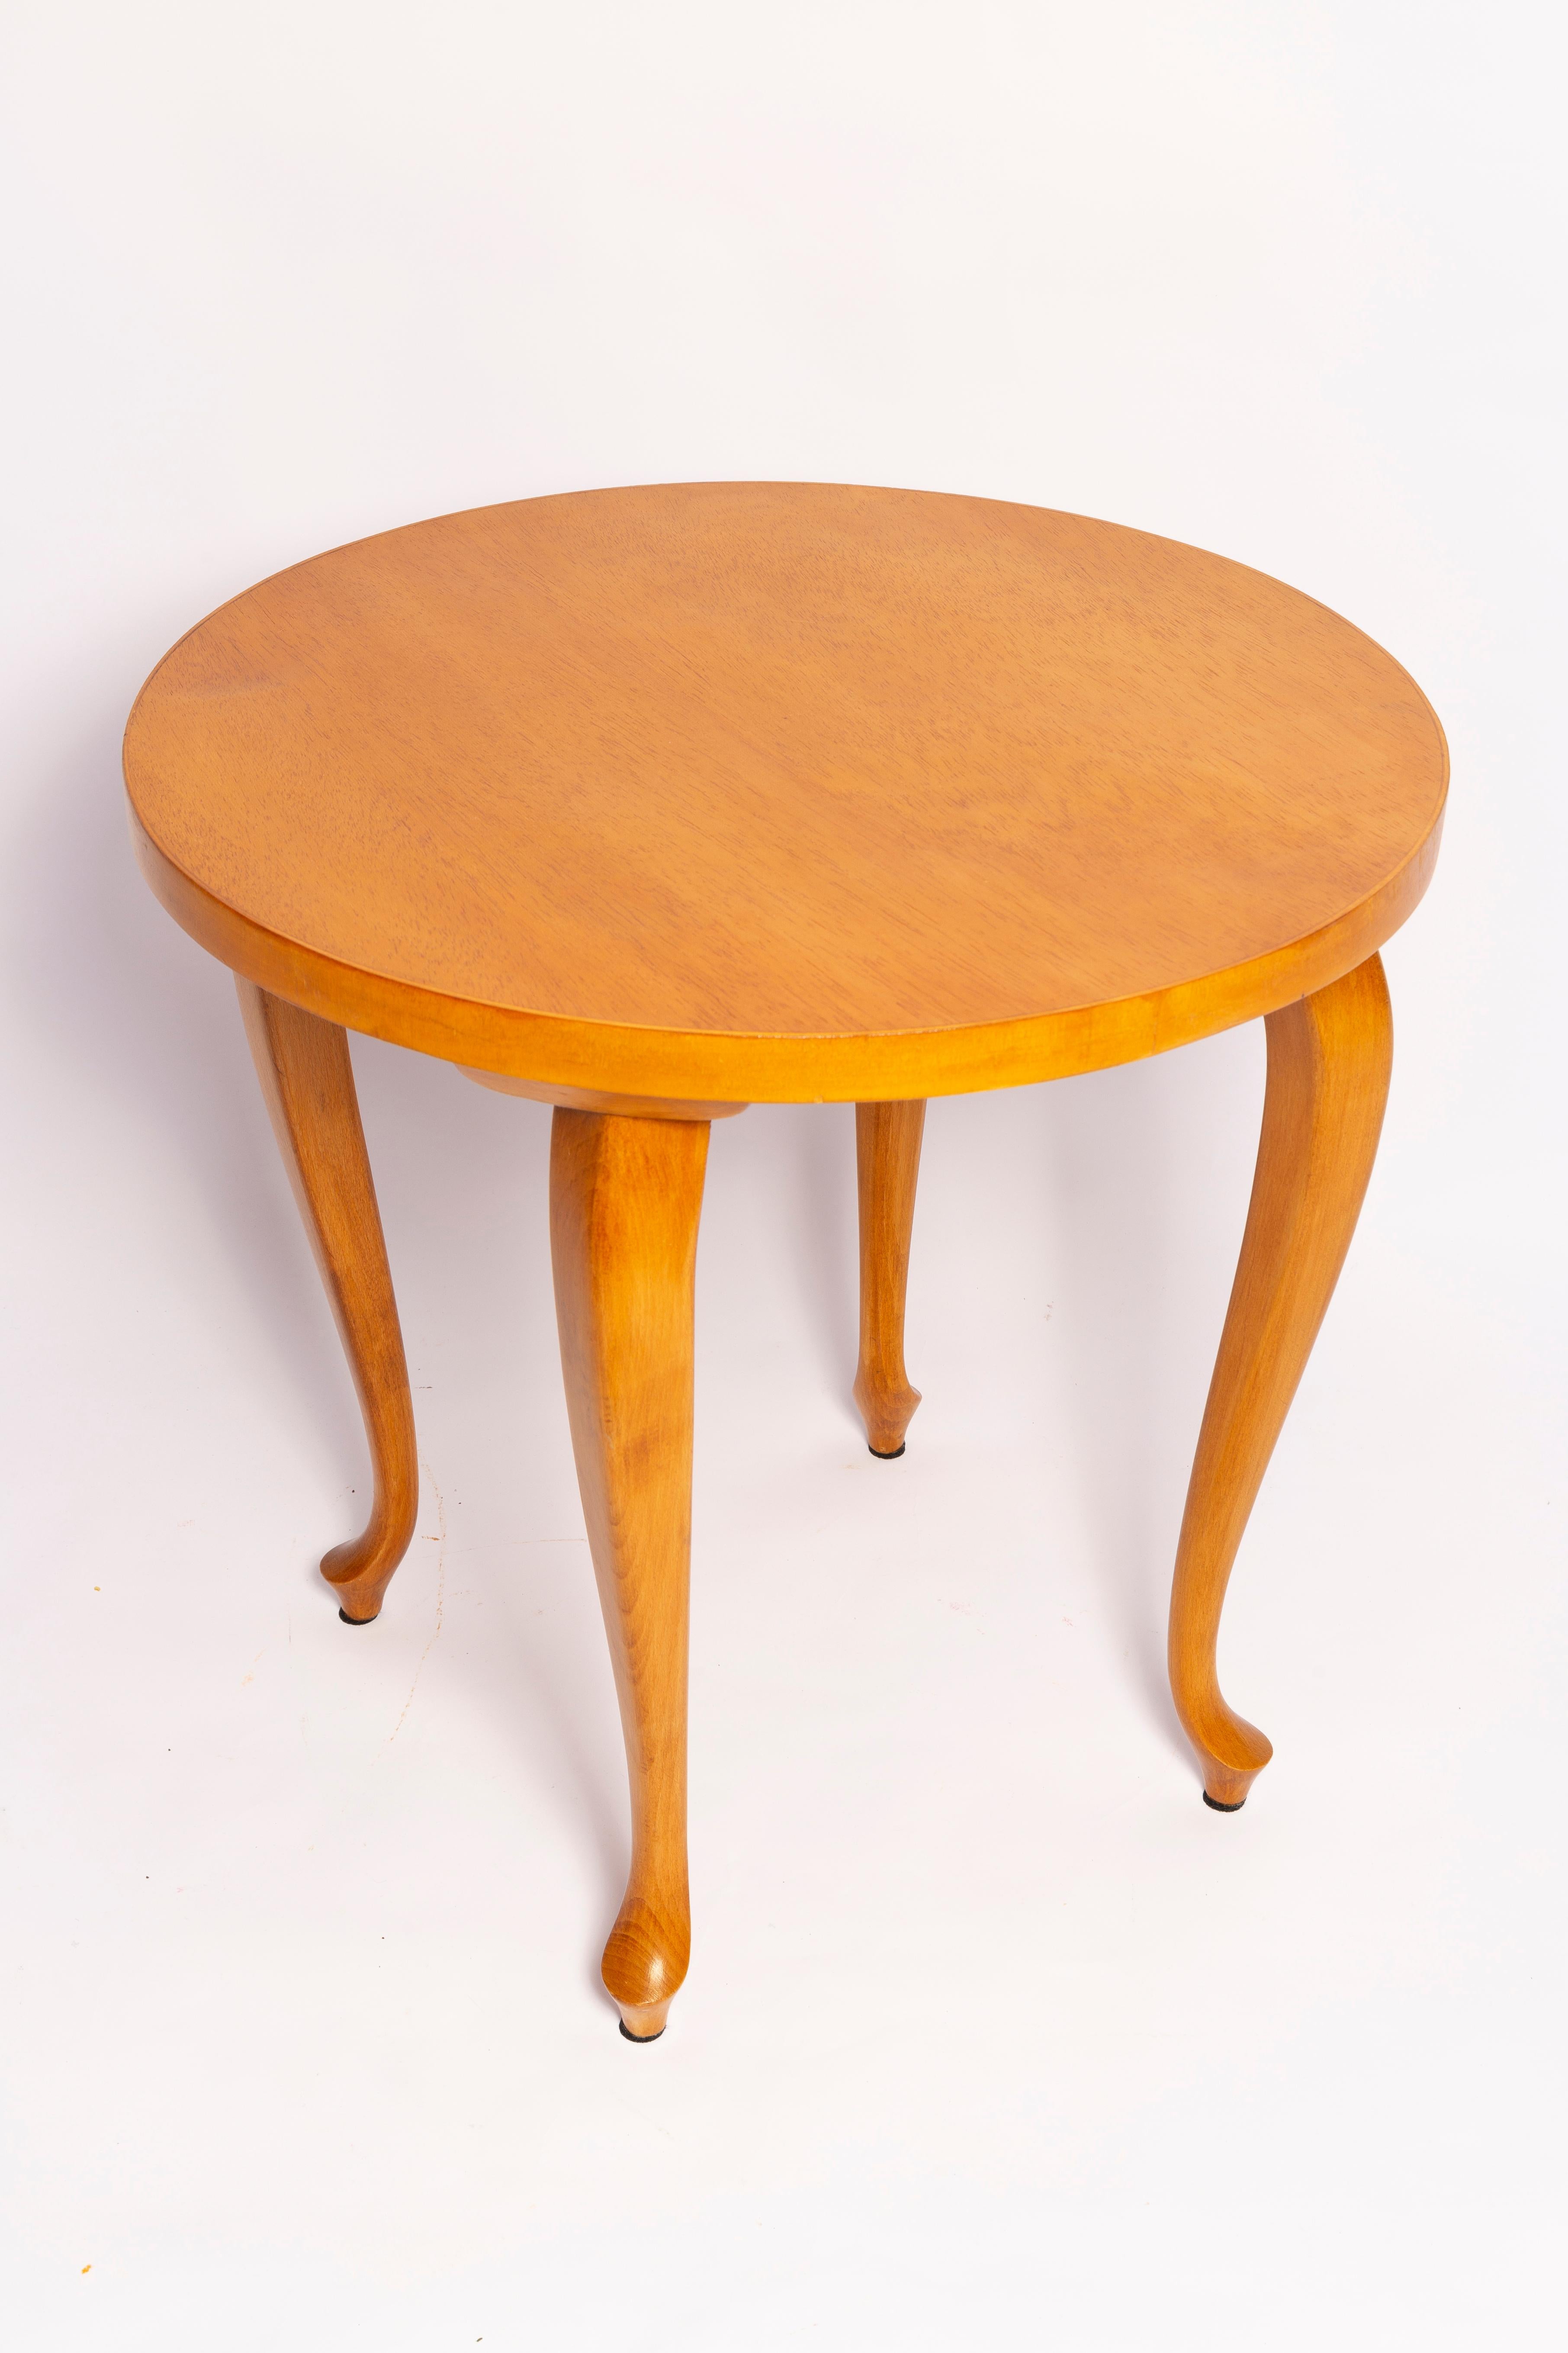 Mid-Century Modern Mid-Century Round Coffee Table, Light Wood, Poland, 1960s For Sale